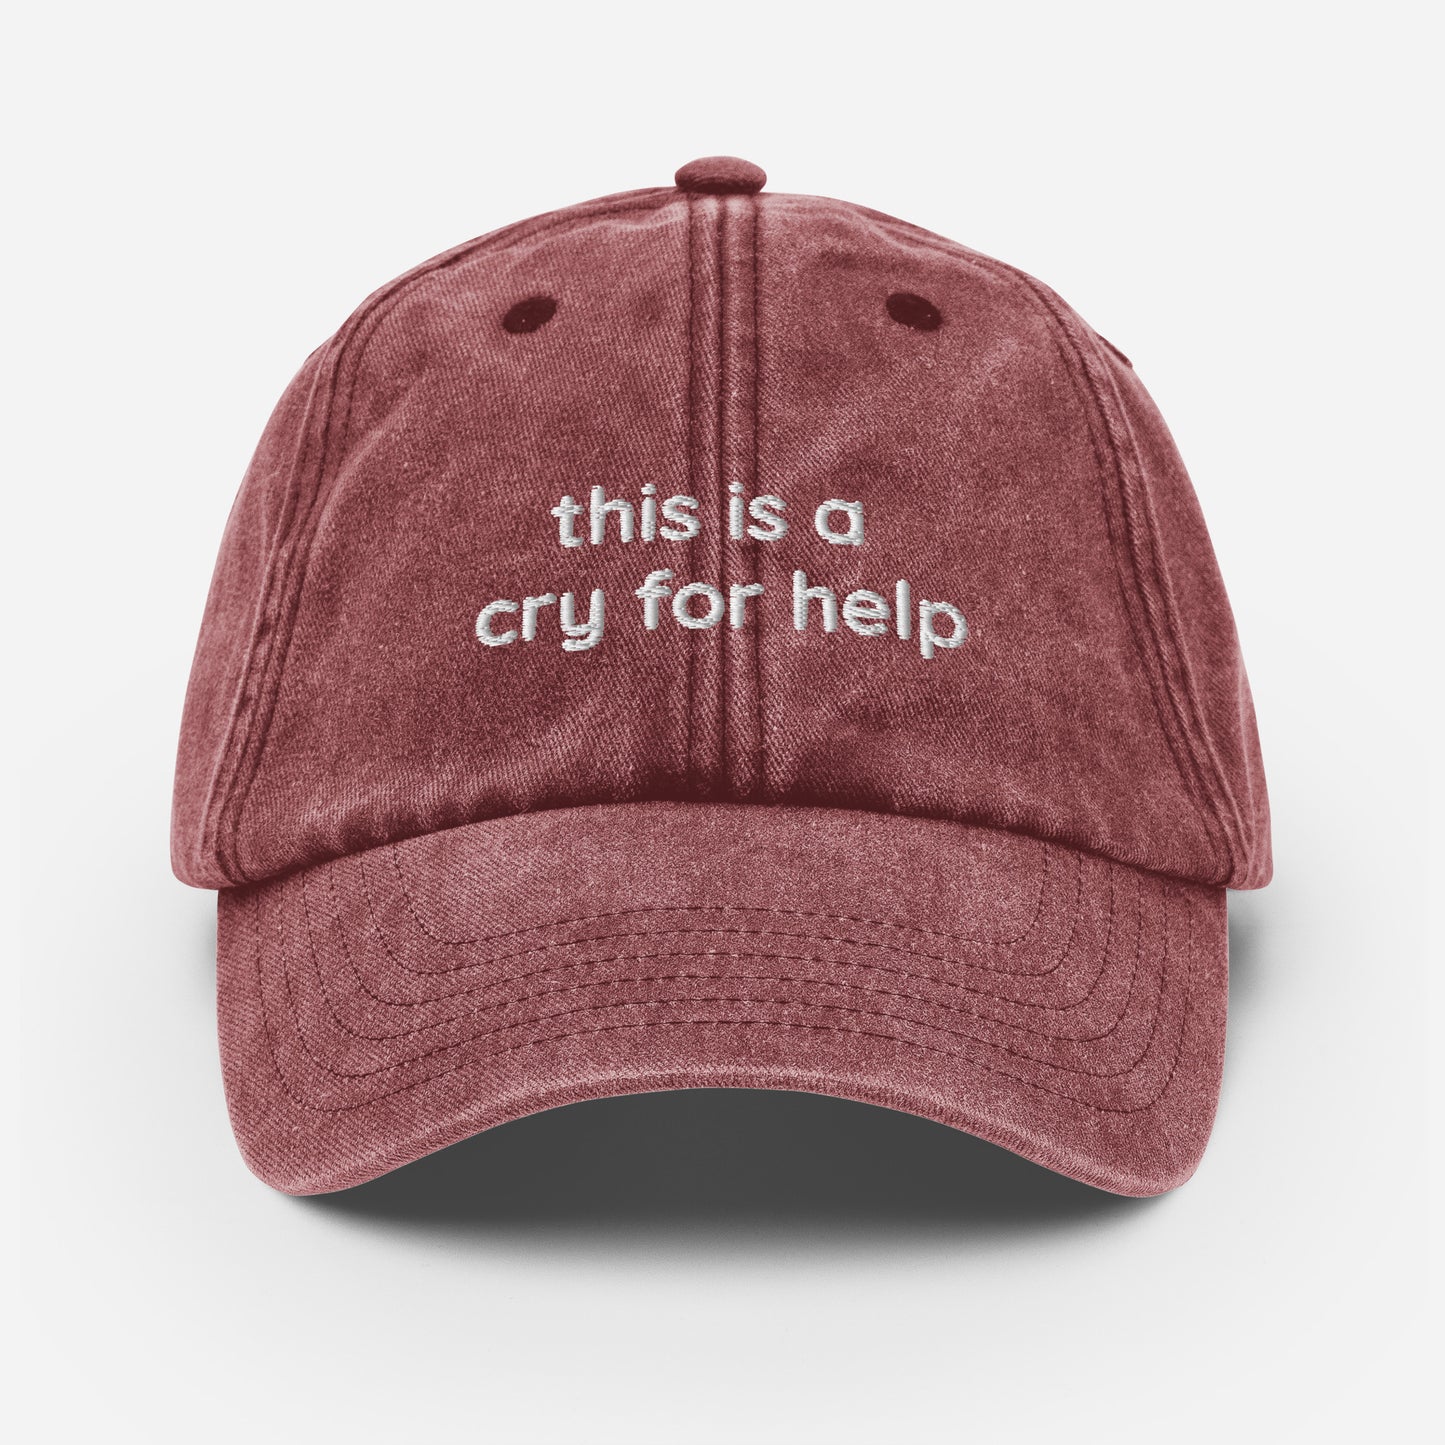 cry for help Hat